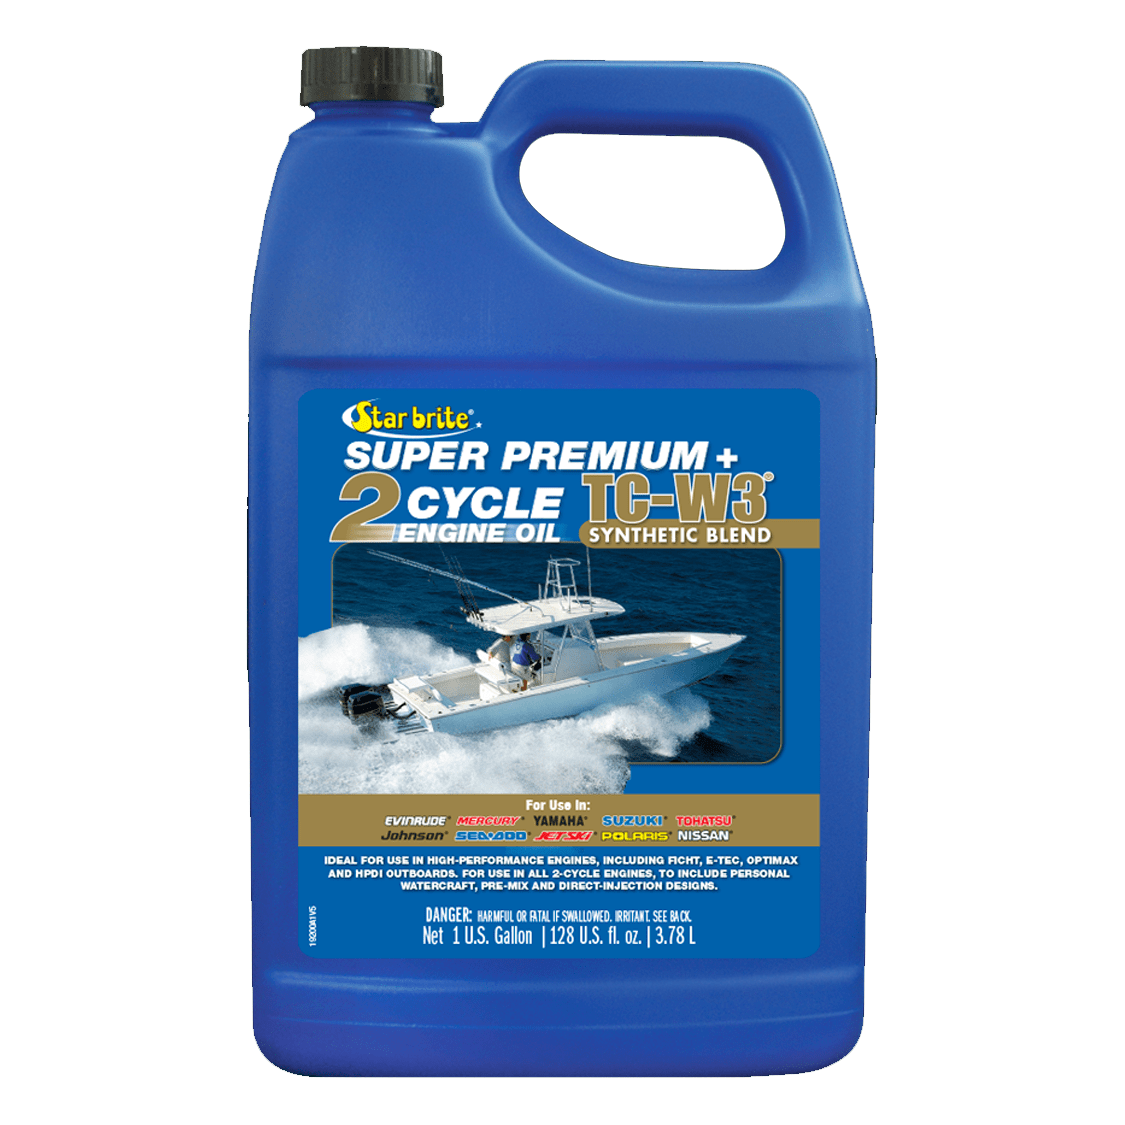 Super Premium 2-Cycle Engine Oil - TC-W3 Synthetic Blend